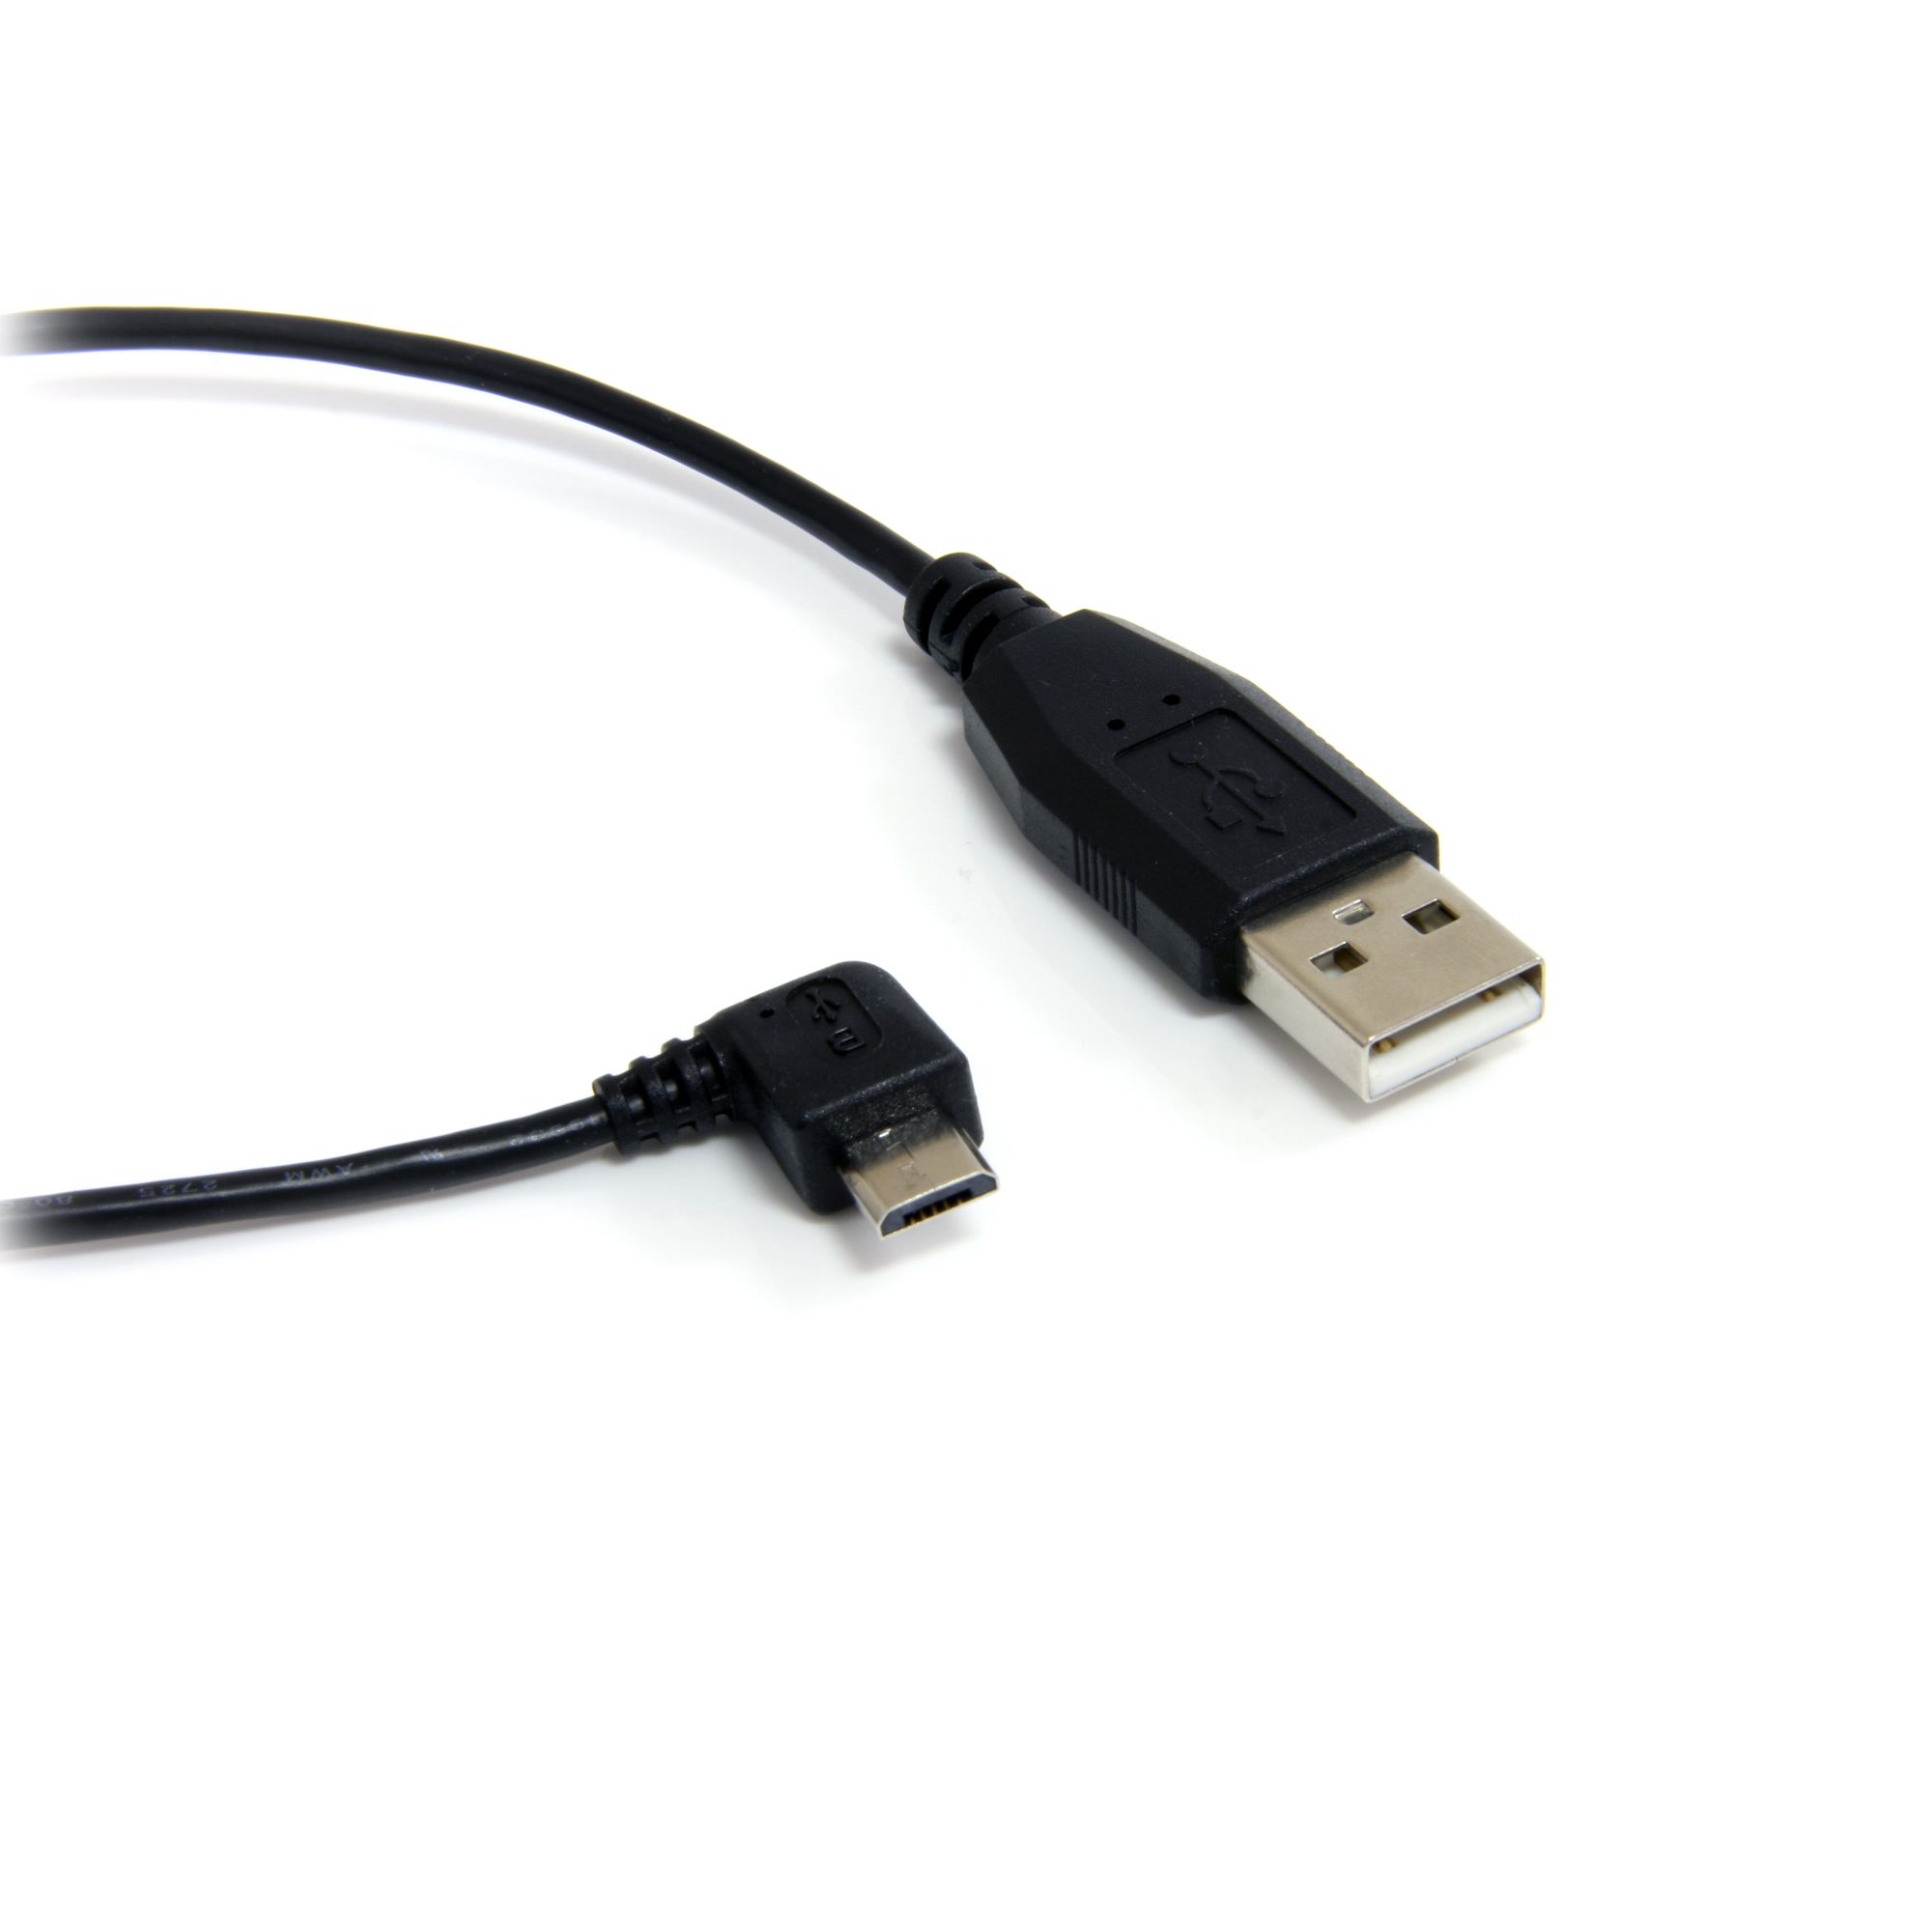 Lot of 10 New 3ft USB 2.0 A Male to Micro-B Male Data Sync Charger Adapter Cable 